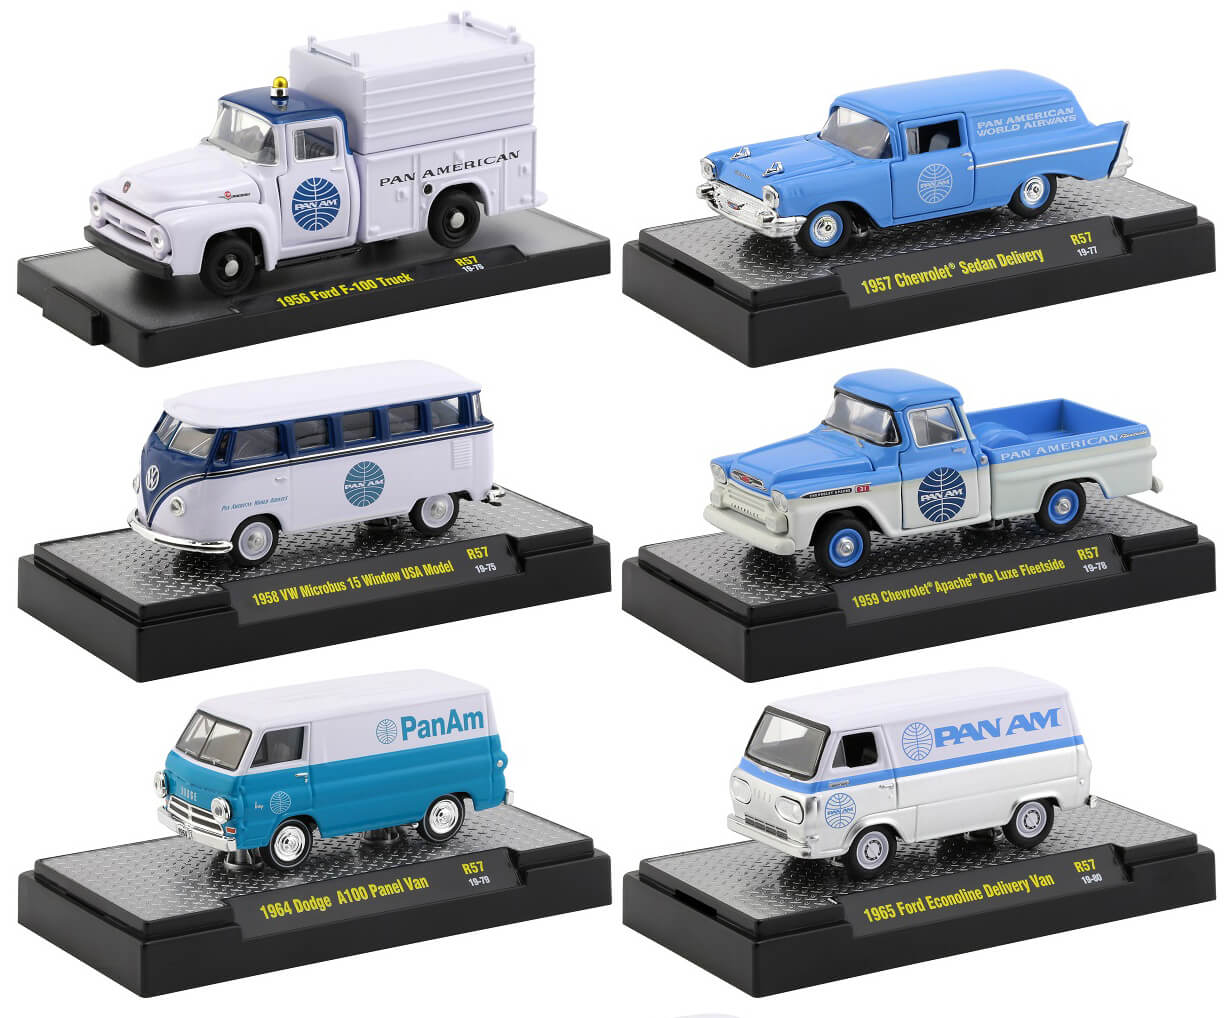 "Auto Trucks" Release 57 Set of 6 pieces "Pan American World Airways" (Pan Am) IN DISPLAY CASES 1/64 Diecast Model Cars by M2 Machines